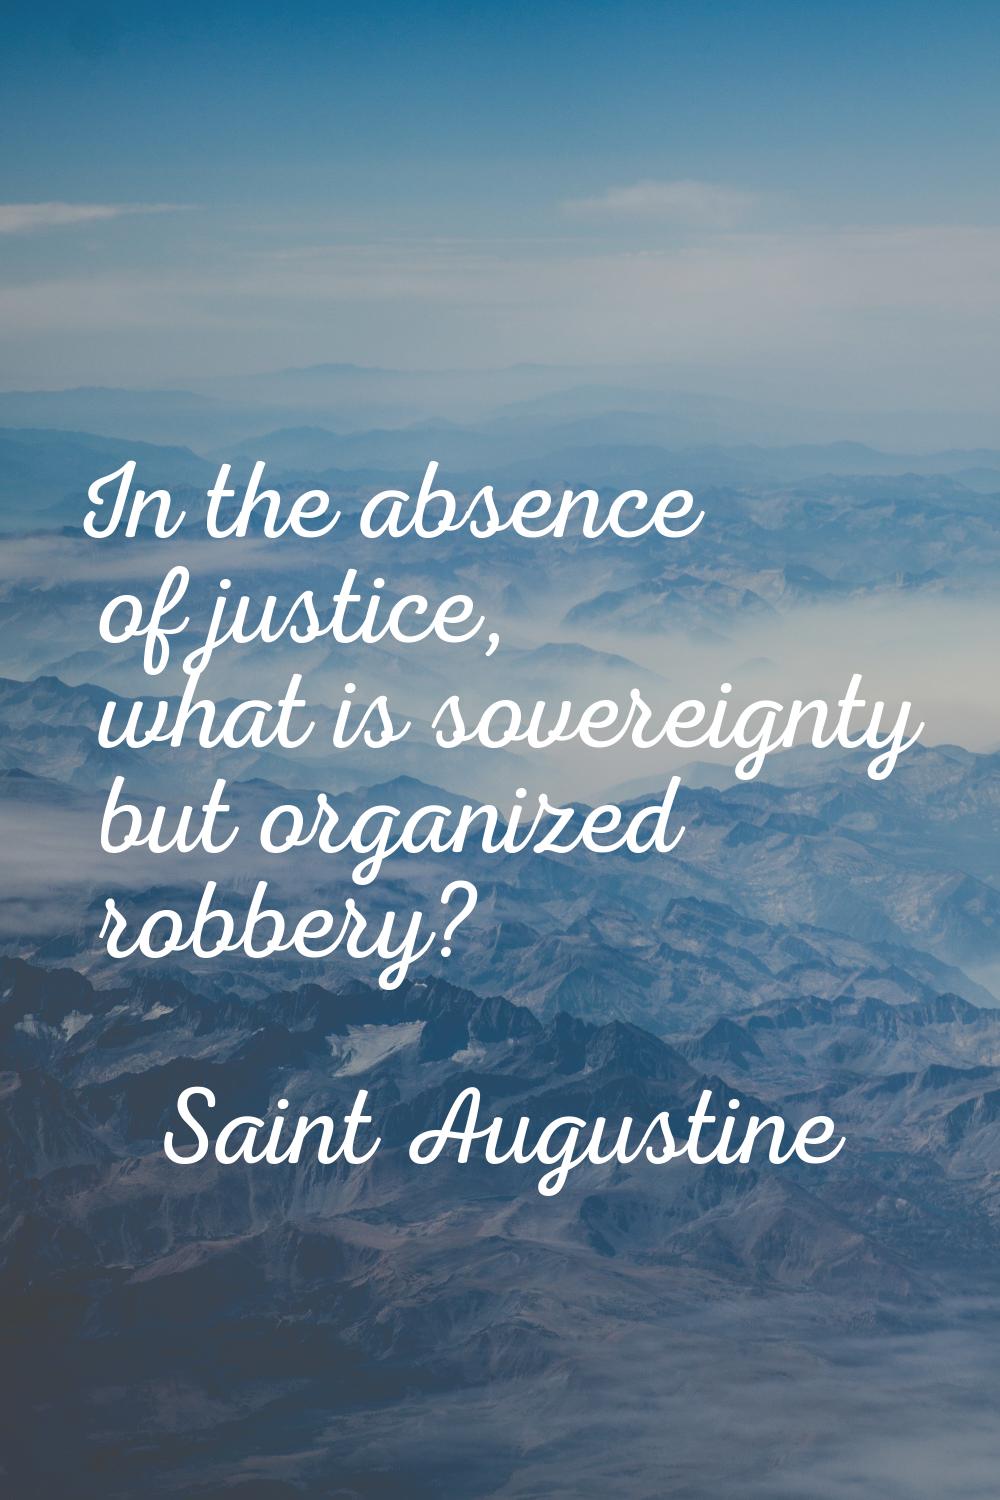 In the absence of justice, what is sovereignty but organized robbery?